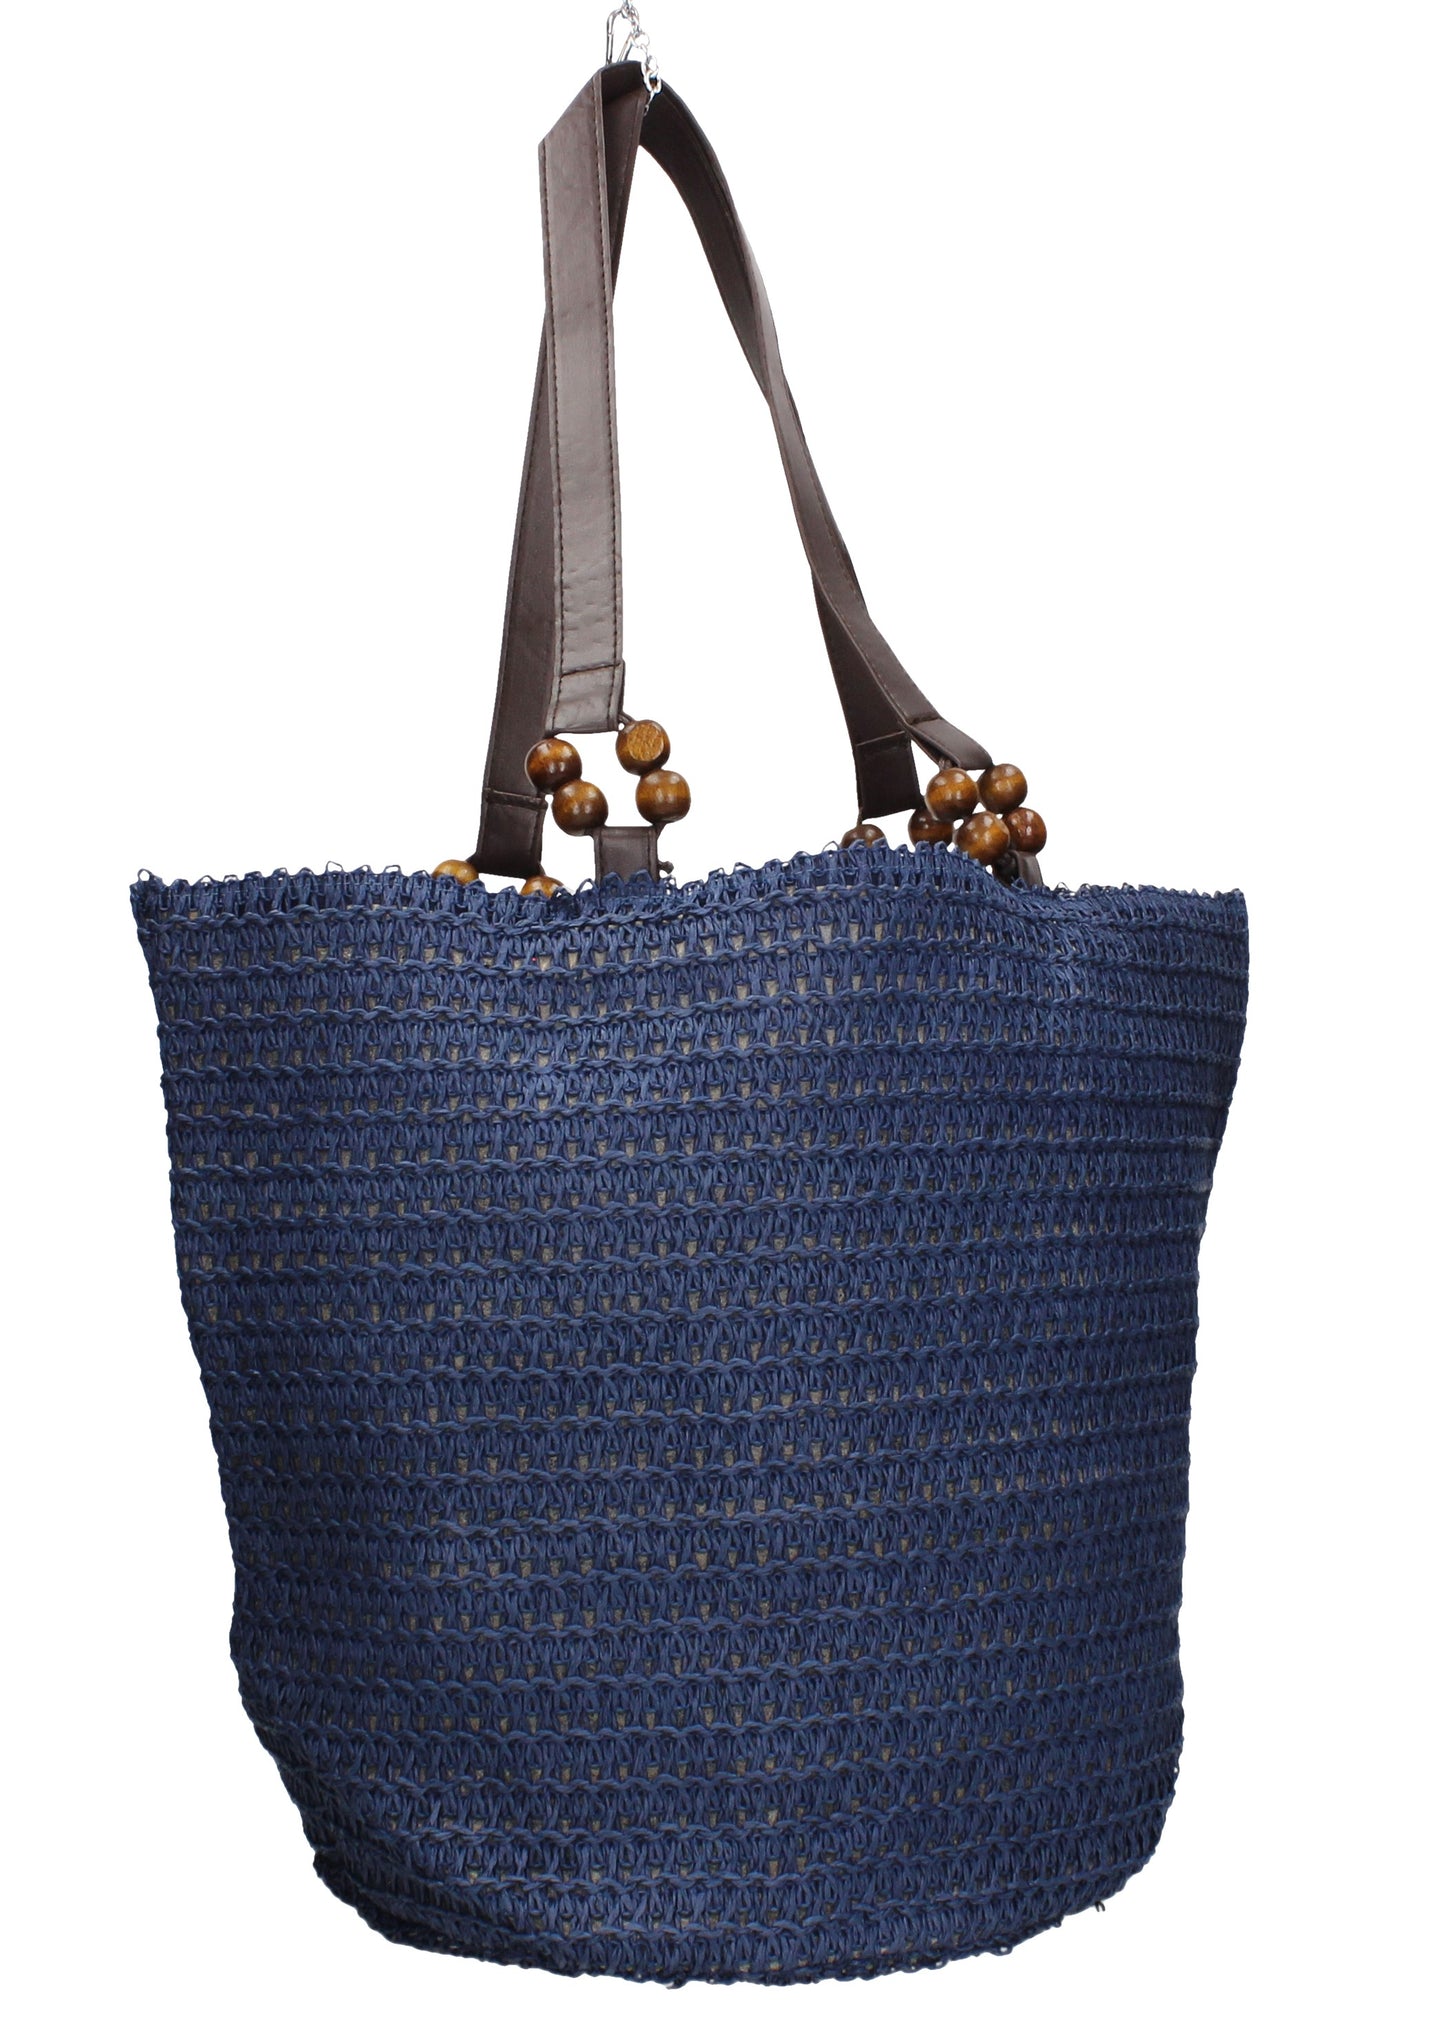 Swanky Swans Soft Bucket Style Blue Beach Tote Bag Summer HandbagPerfect for School, Weddings, Day out!